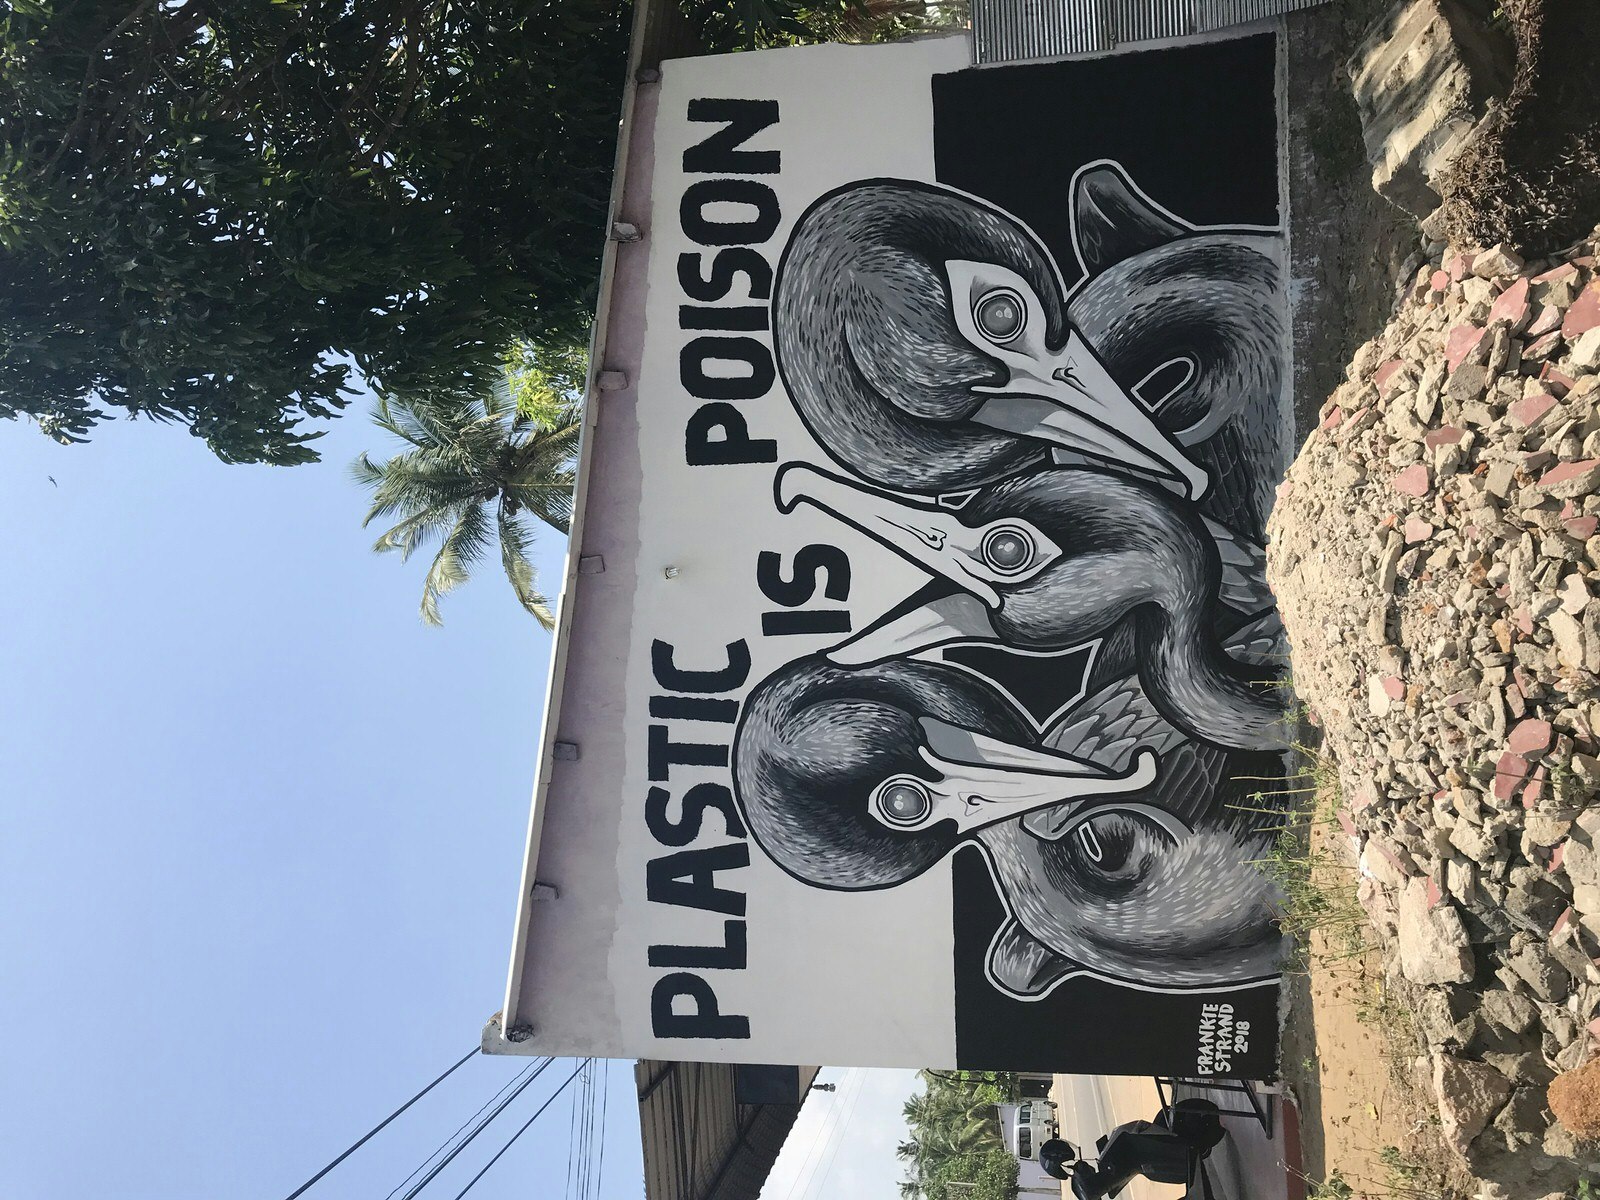 A black-and-white mural painted on the side of a small building near a beach. The mural shows three seabirds from the neck up, bending their heads in different directions with the words 'plastic is poison' above them.